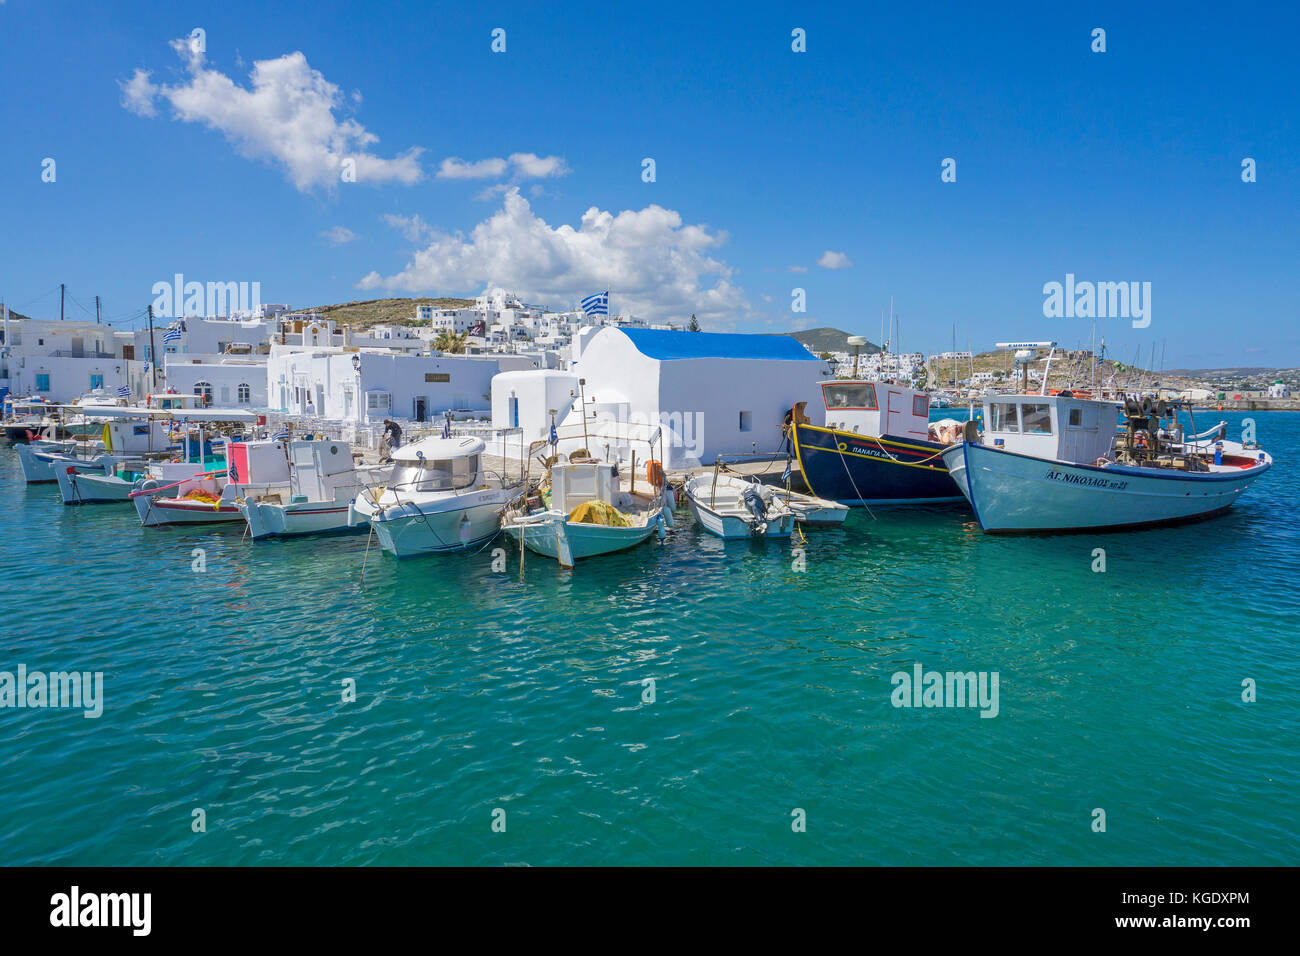 Fishing boats at a small orthodox chapel, harbour at Naoussa, Paros island, Cyclades, Aegean, Greece Stock Photo